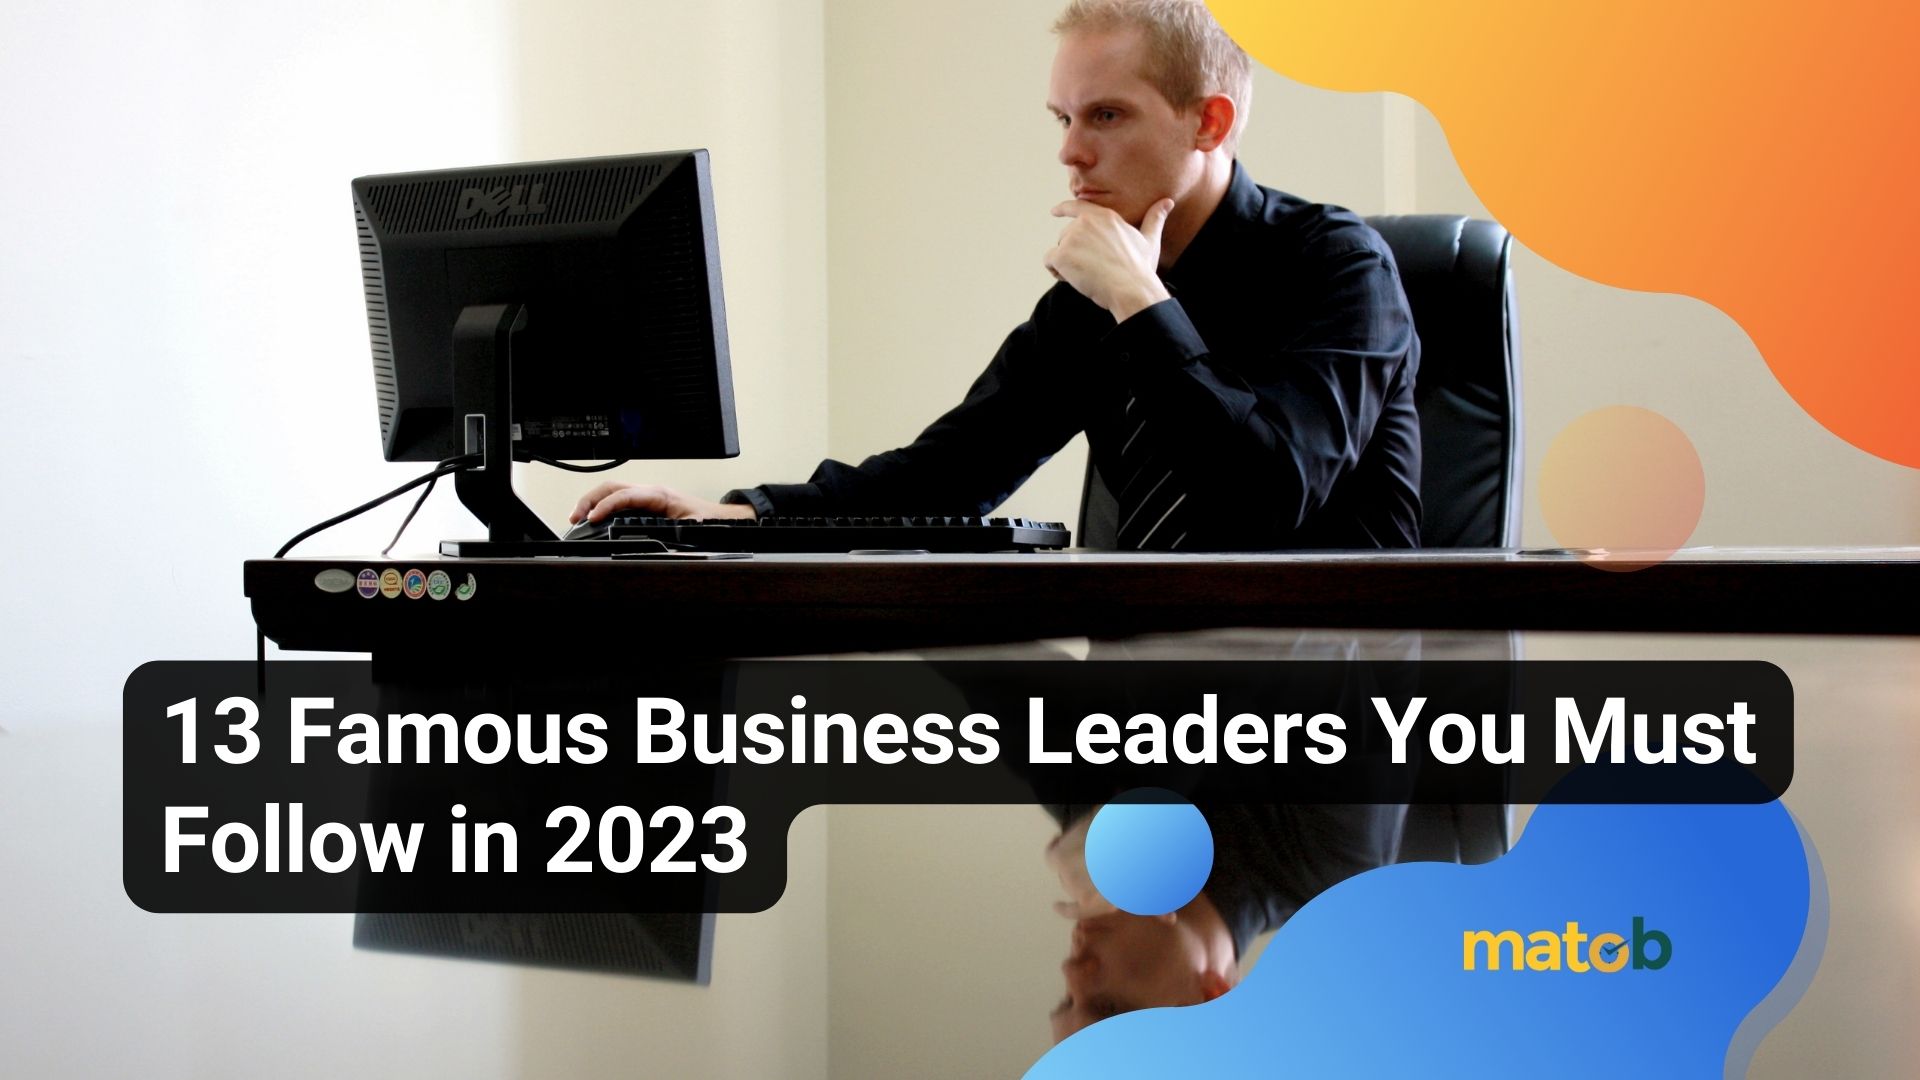 13 Famous Business Leaders You Must Follow in 2023